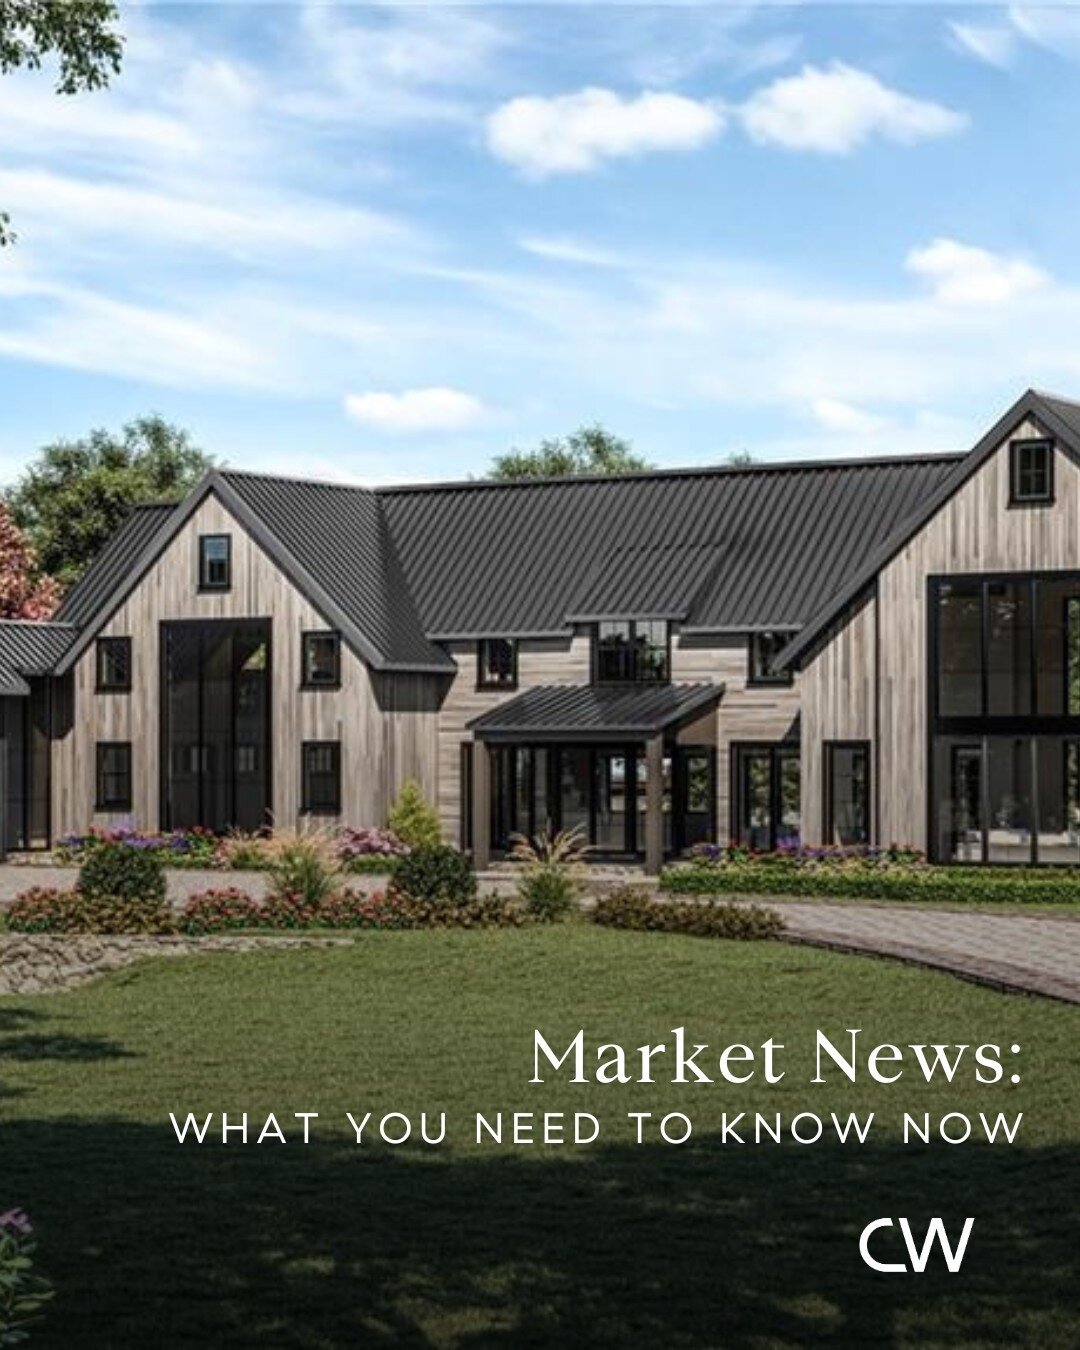 Not sure what's going on with the housing market? ⁠Not to worry: I've got the real estate news you need to know now. ⁠

Here are 3 headlines to pay attention to:⁠
⁠
🗞️ Median sales for Single-Family Homes are Up 4% Quarter Over Quarter in Westcheste